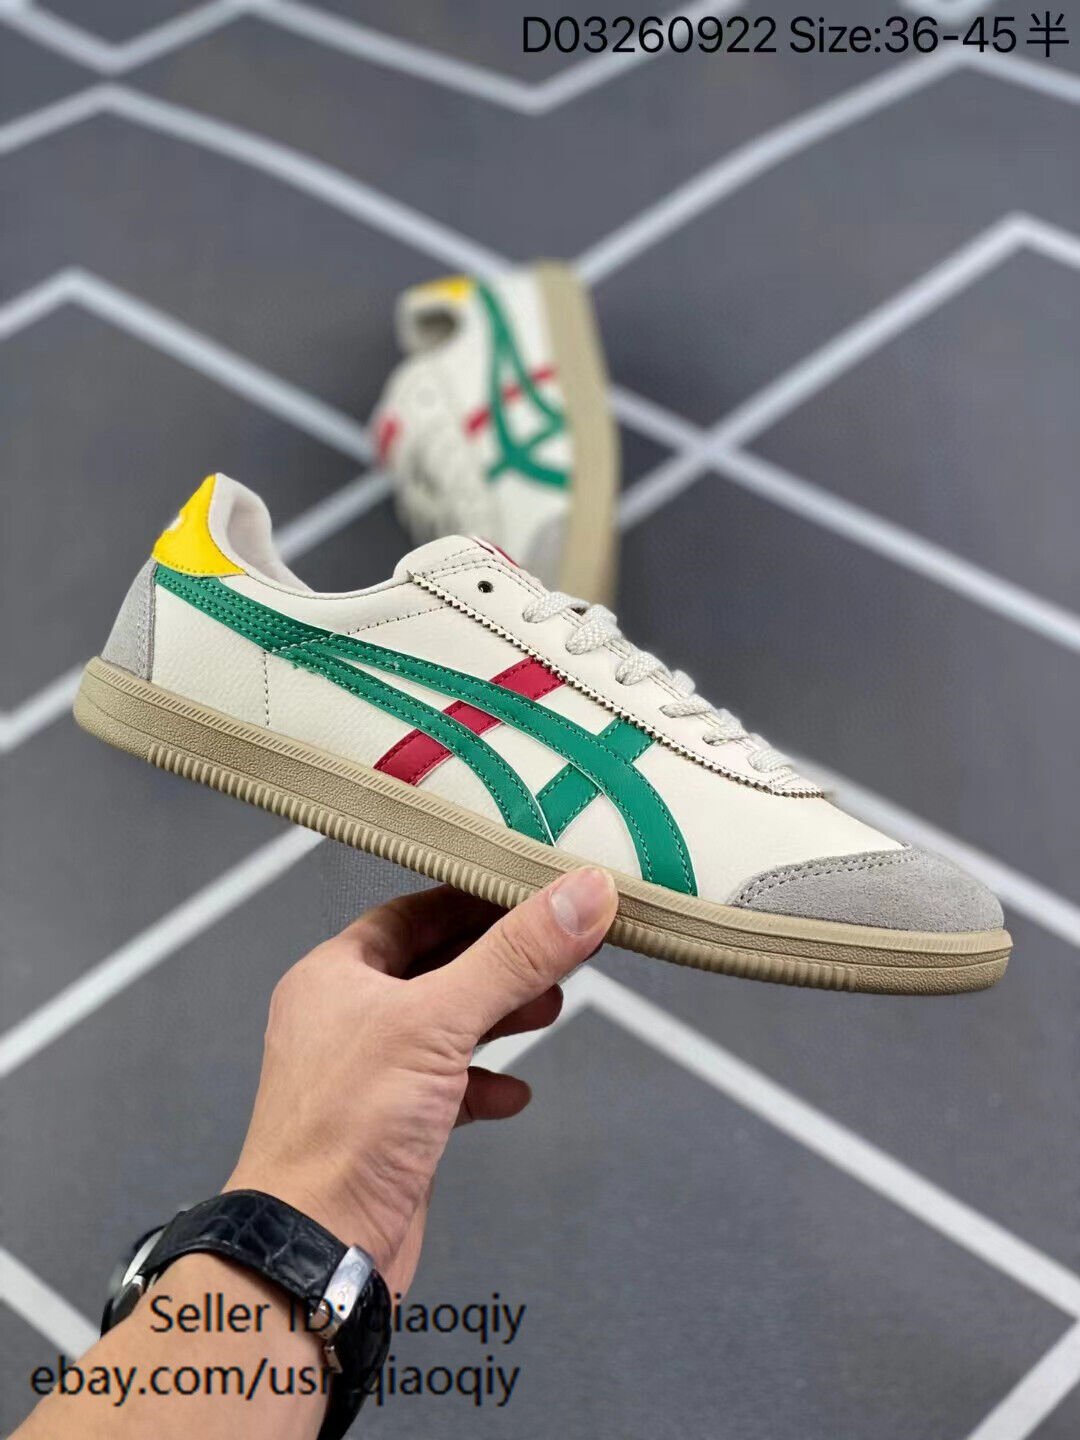 NEW Onitsuka Tiger MEXICO Birch/Green Sneakers Unisex Retro Shoes 1183C095-200